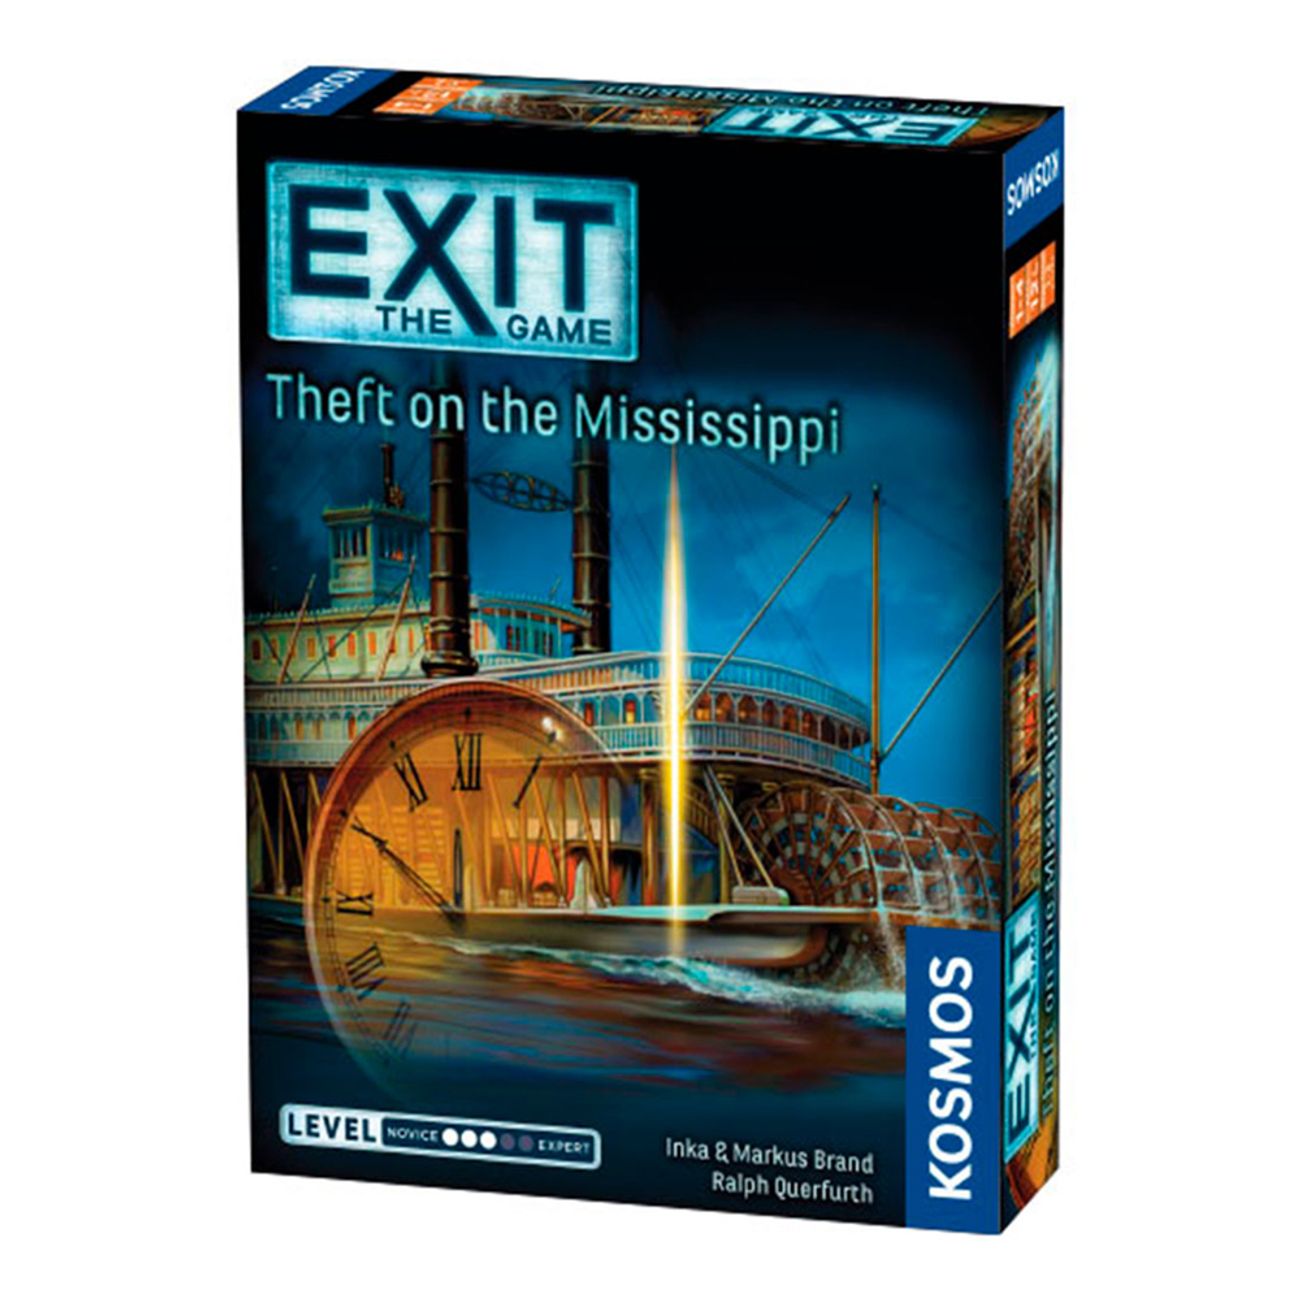 exit-the-theft-on-the-mississippi-spel-1